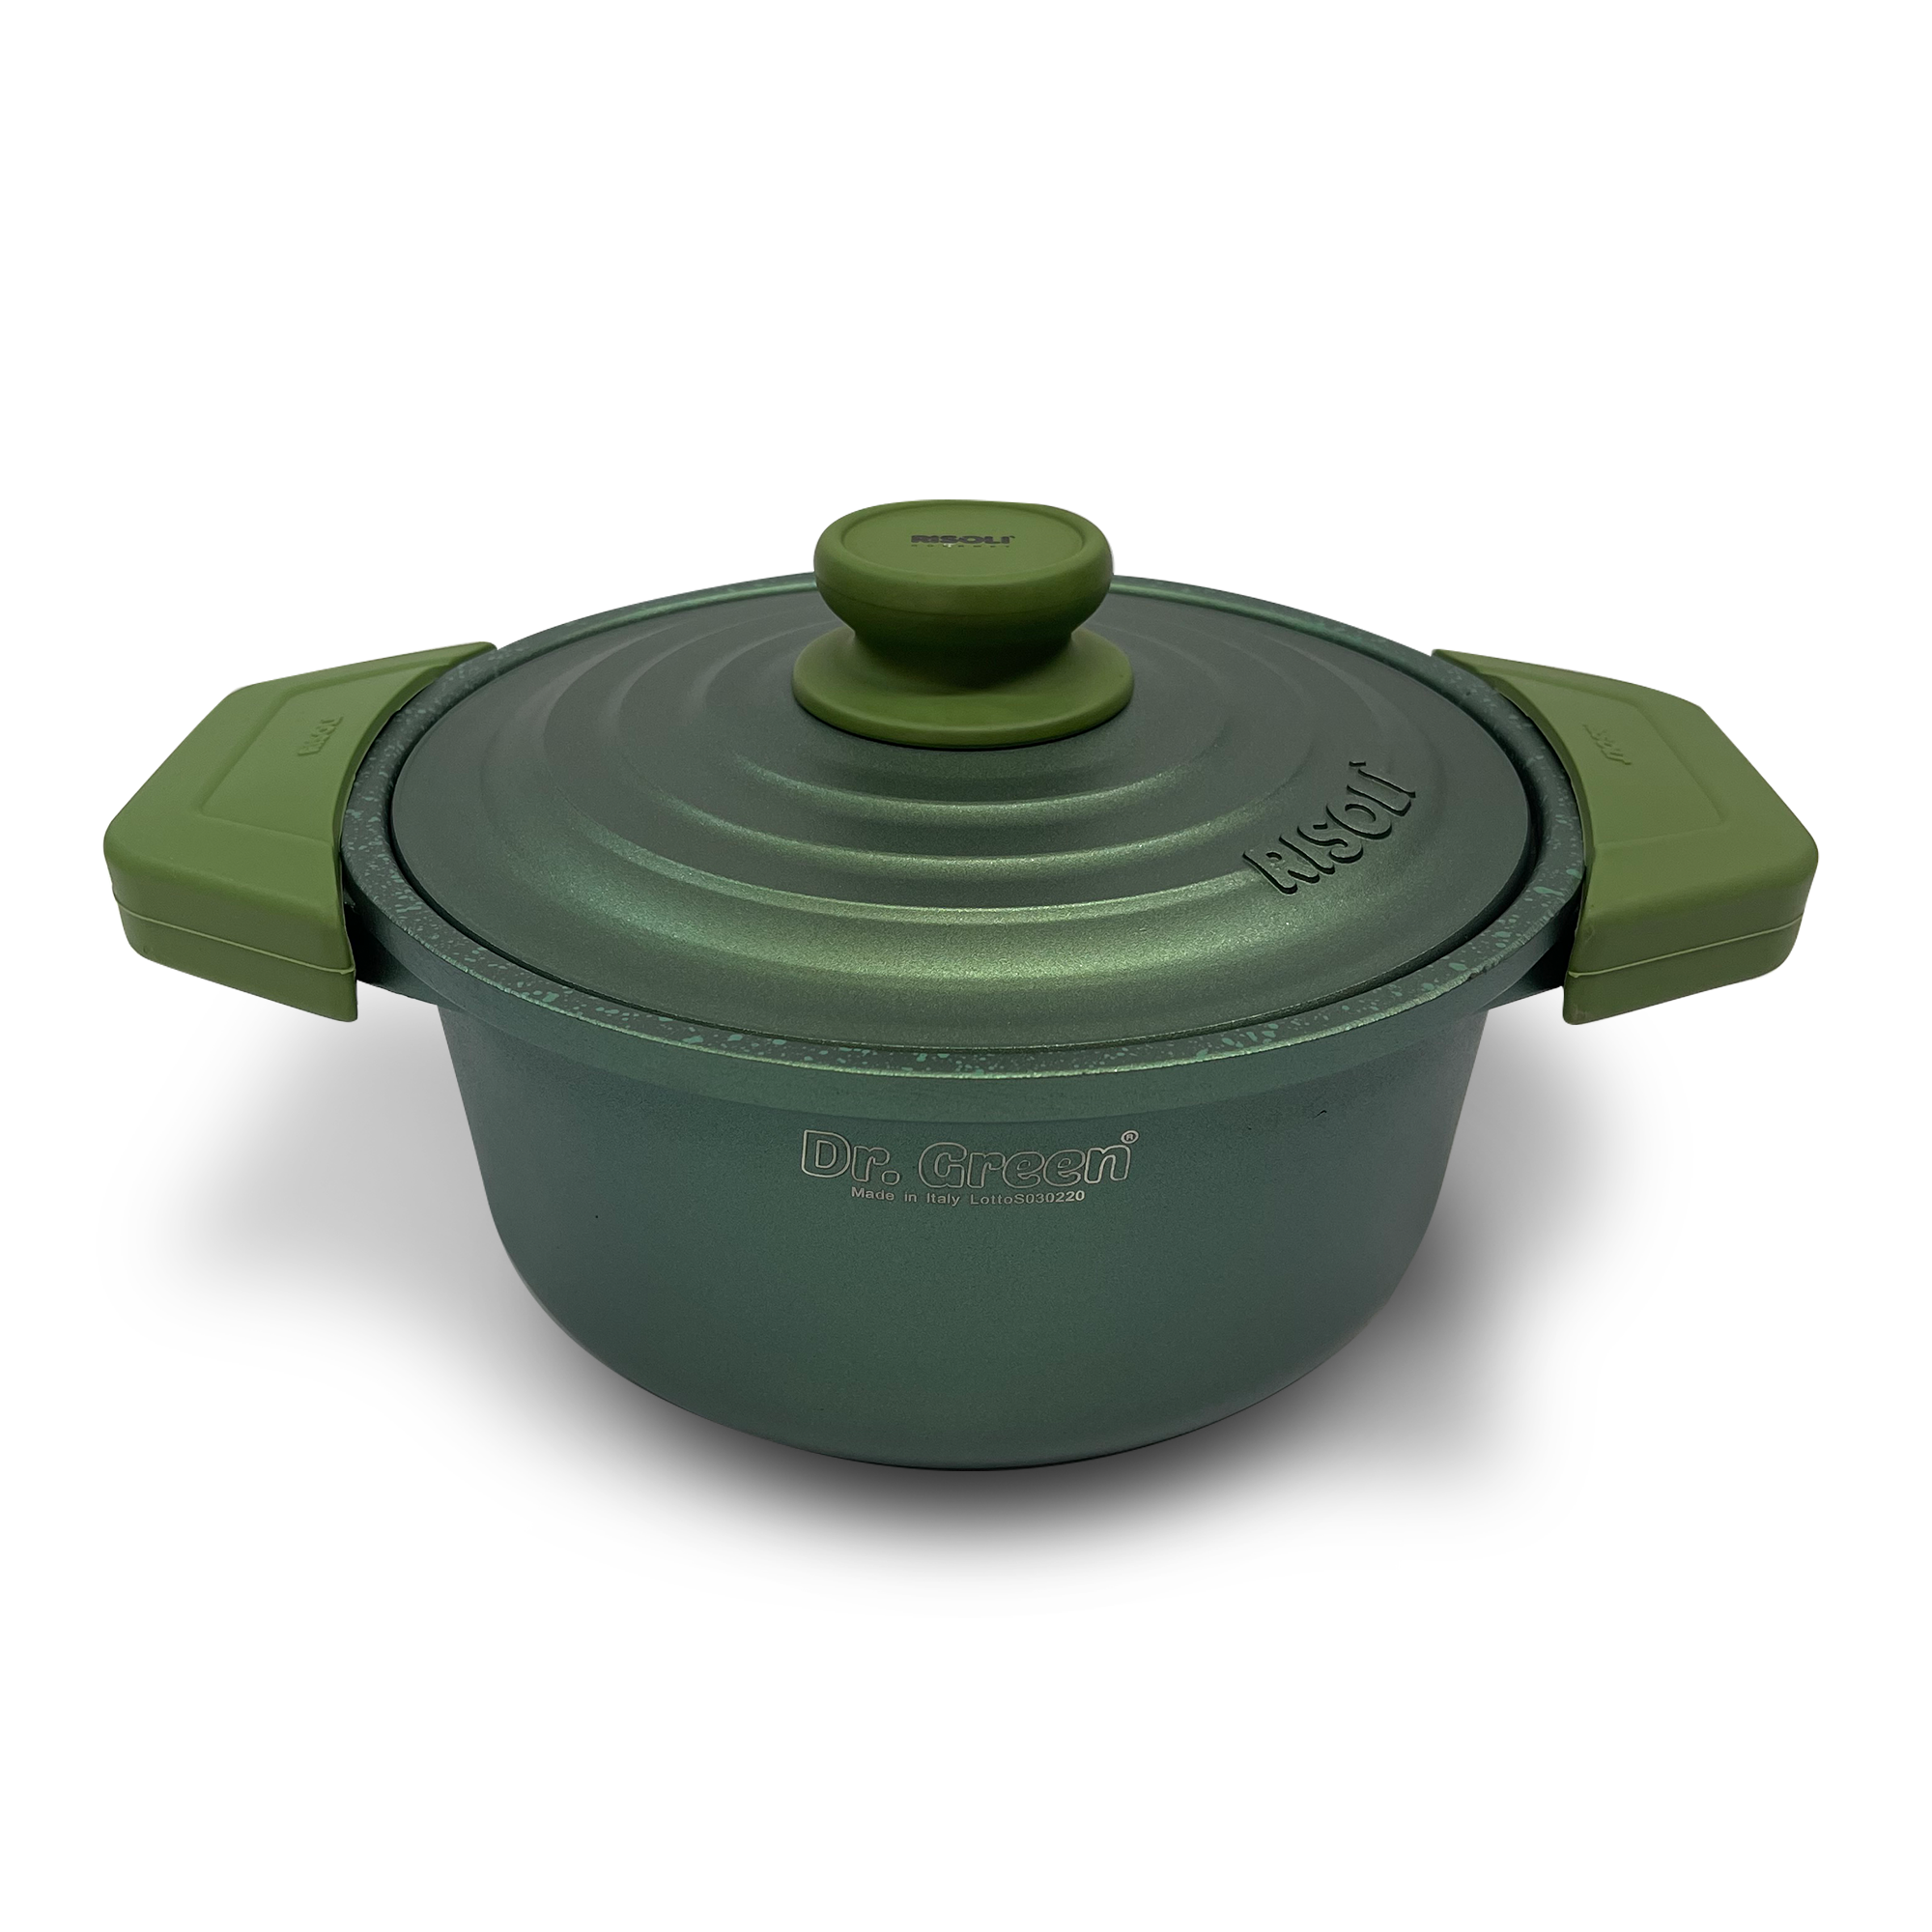 Risoli Dr. Green Pot with Lid and Handles -28cm